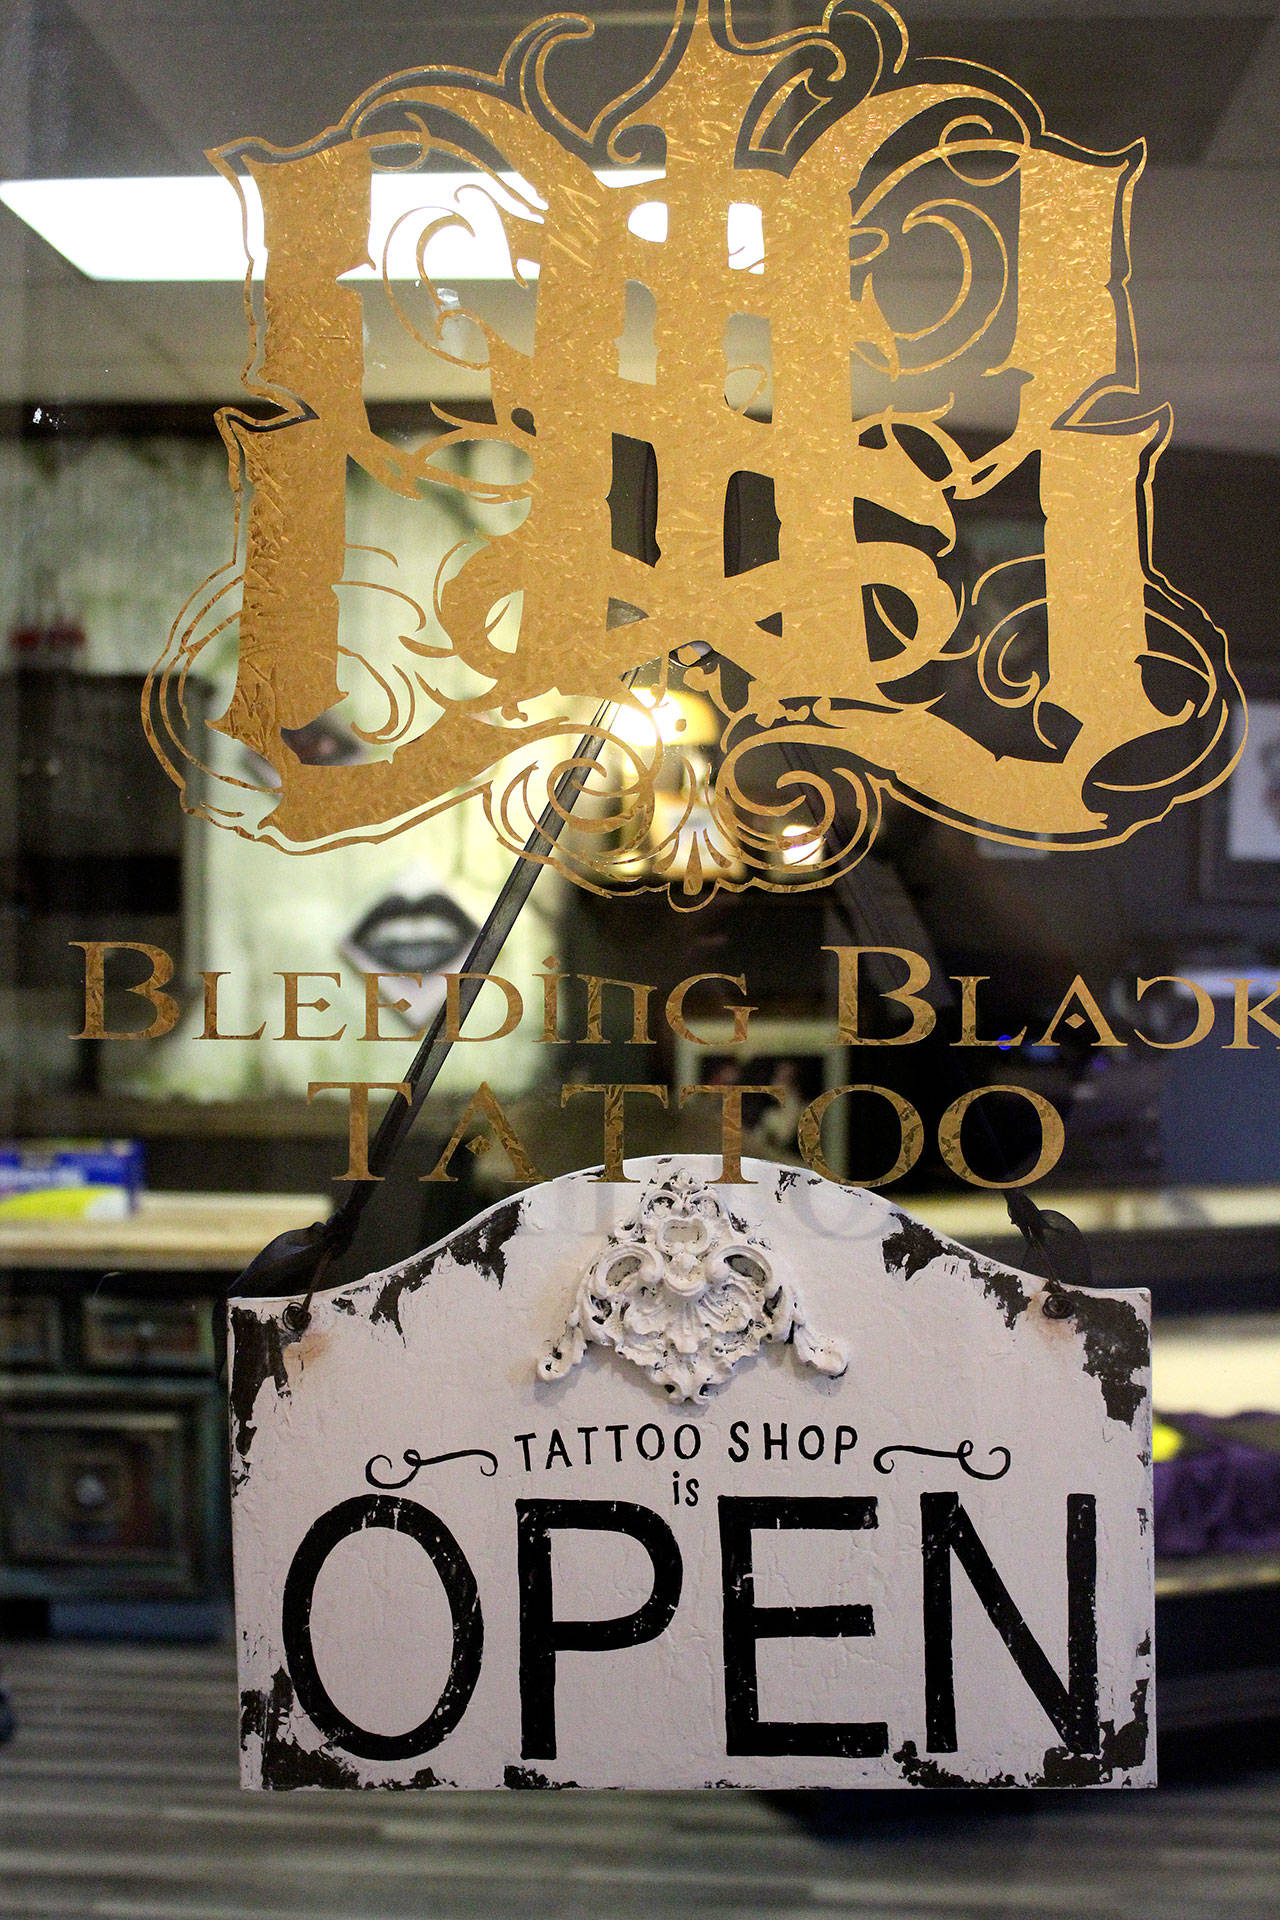 Bleeding Black Tattoo, owned by artist Nik Flores, is open 11 a.m. to 9 p.m. daily in Old Town Silverdale. Bleeding Black specializes in custom tattoos of any style.                                Michelle Beahm / Kitsap News Group